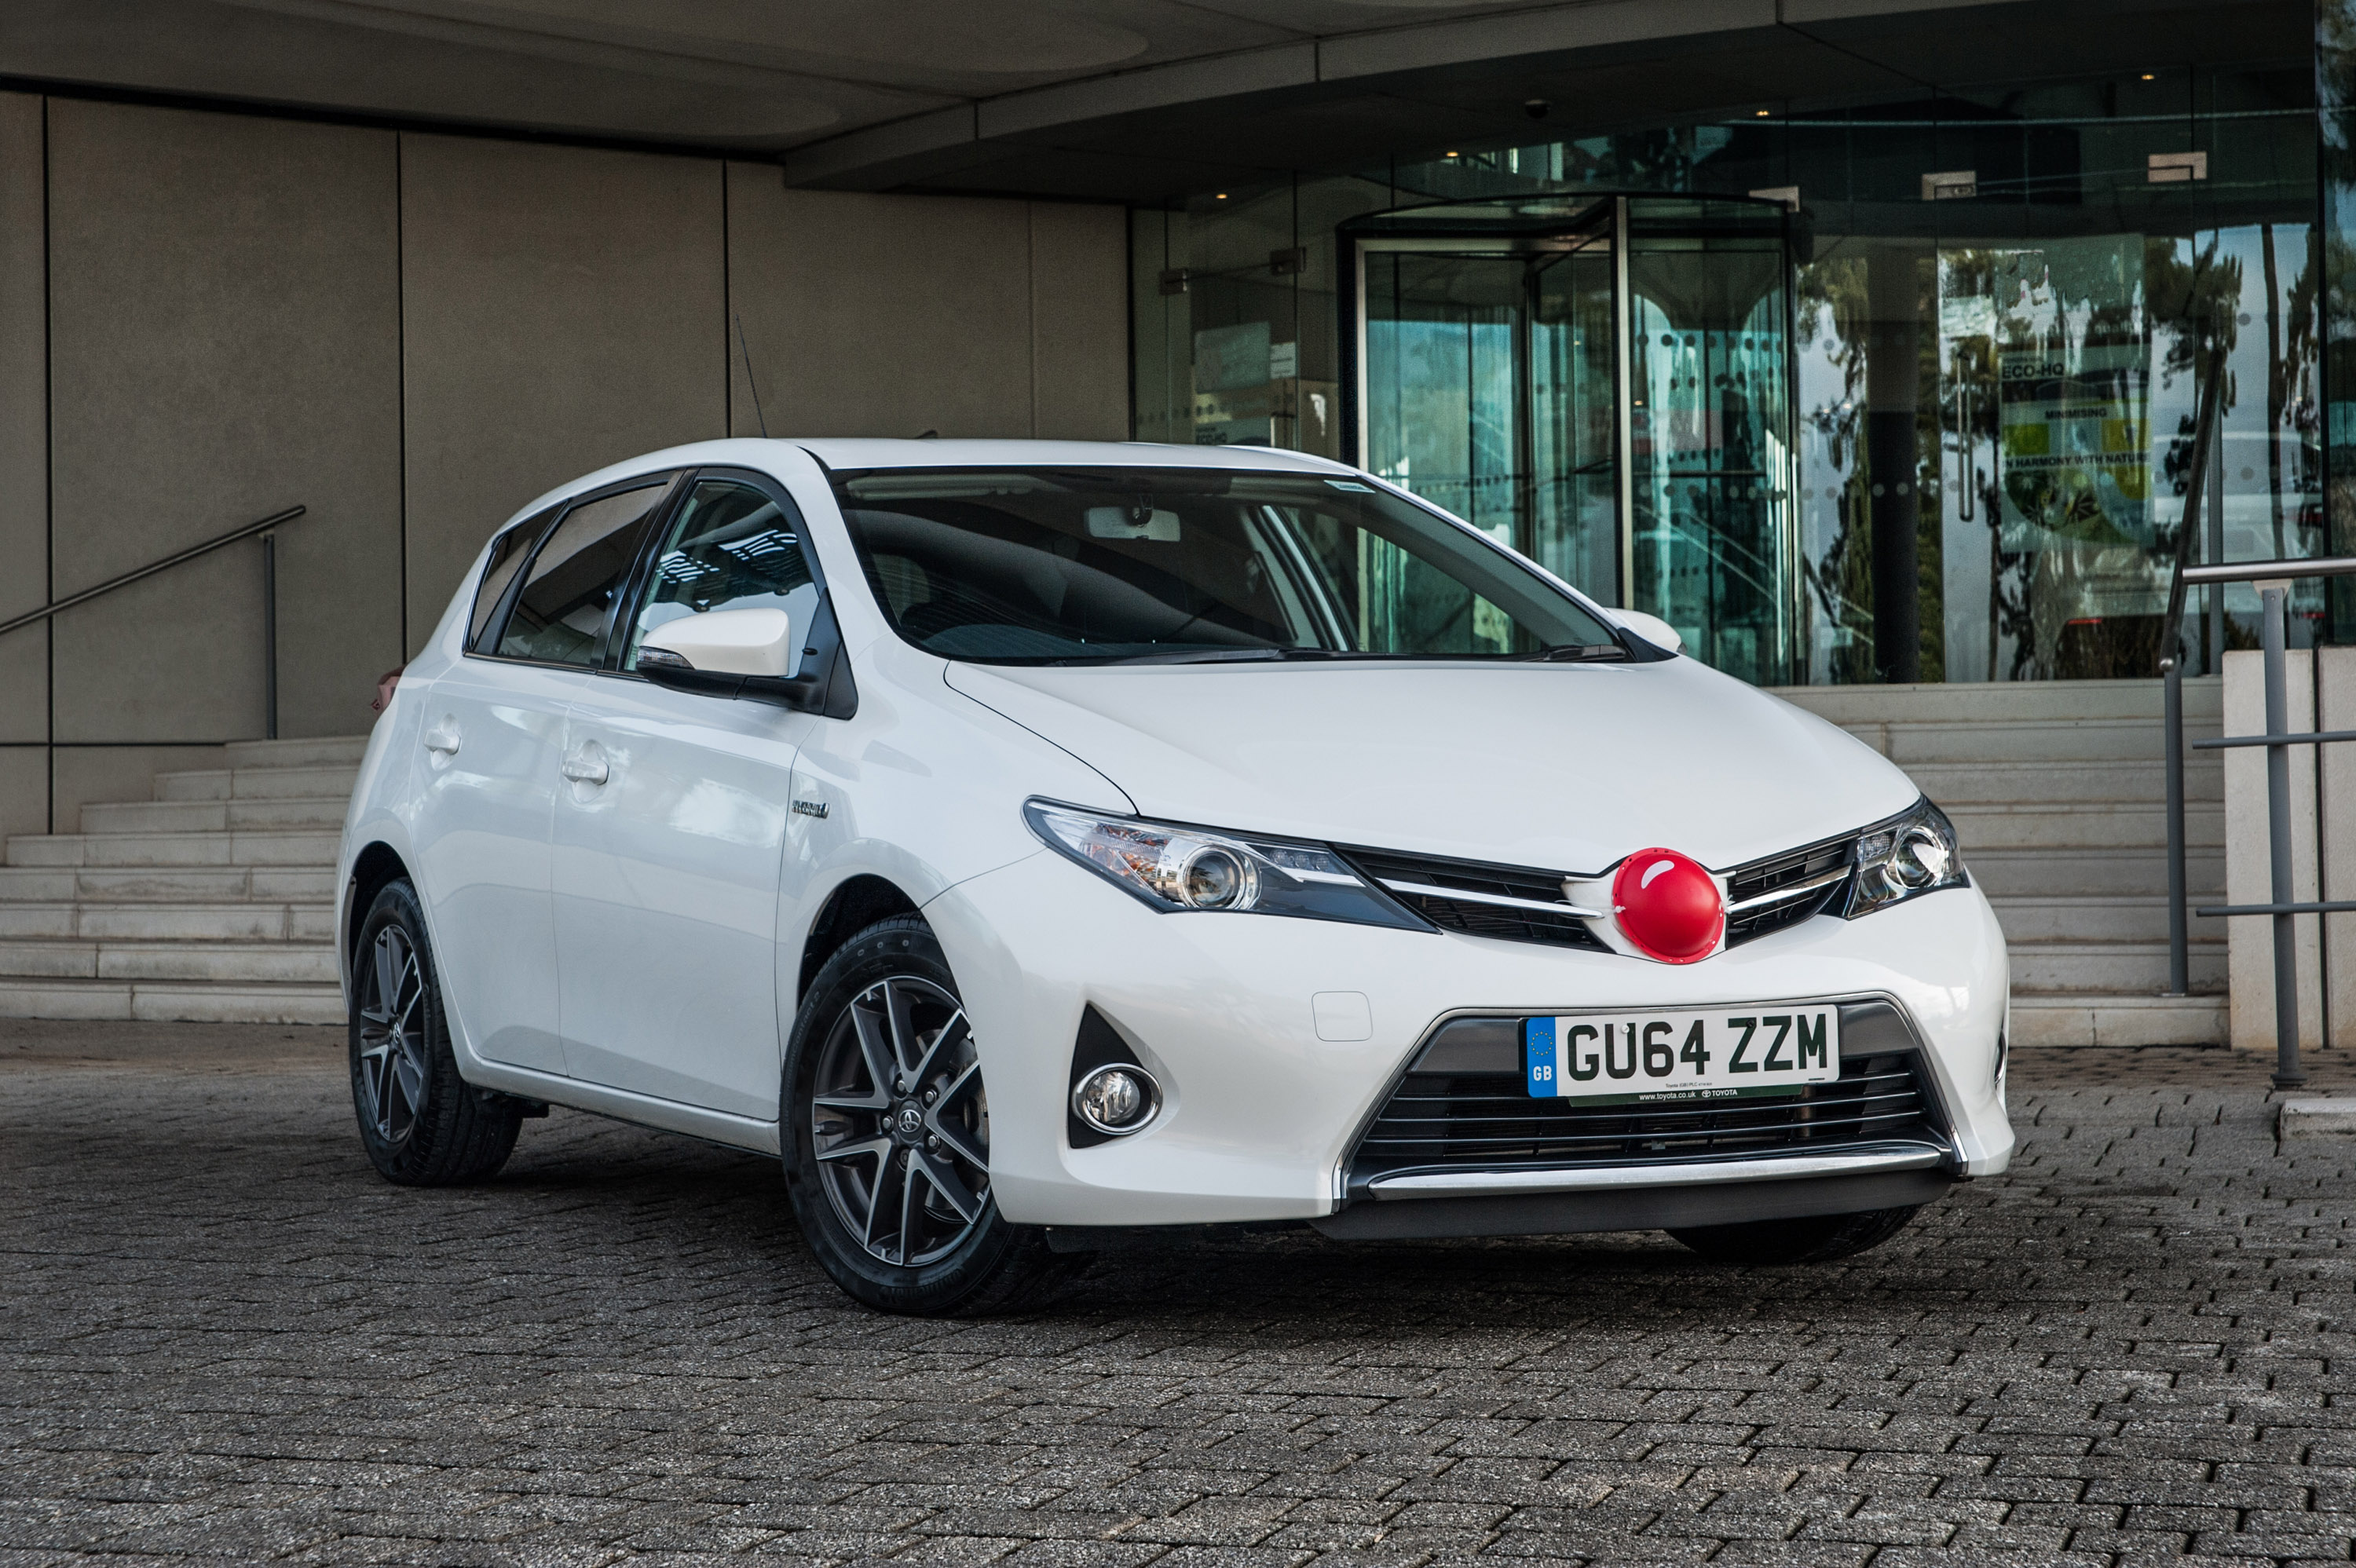 Toyota Red Nose Day